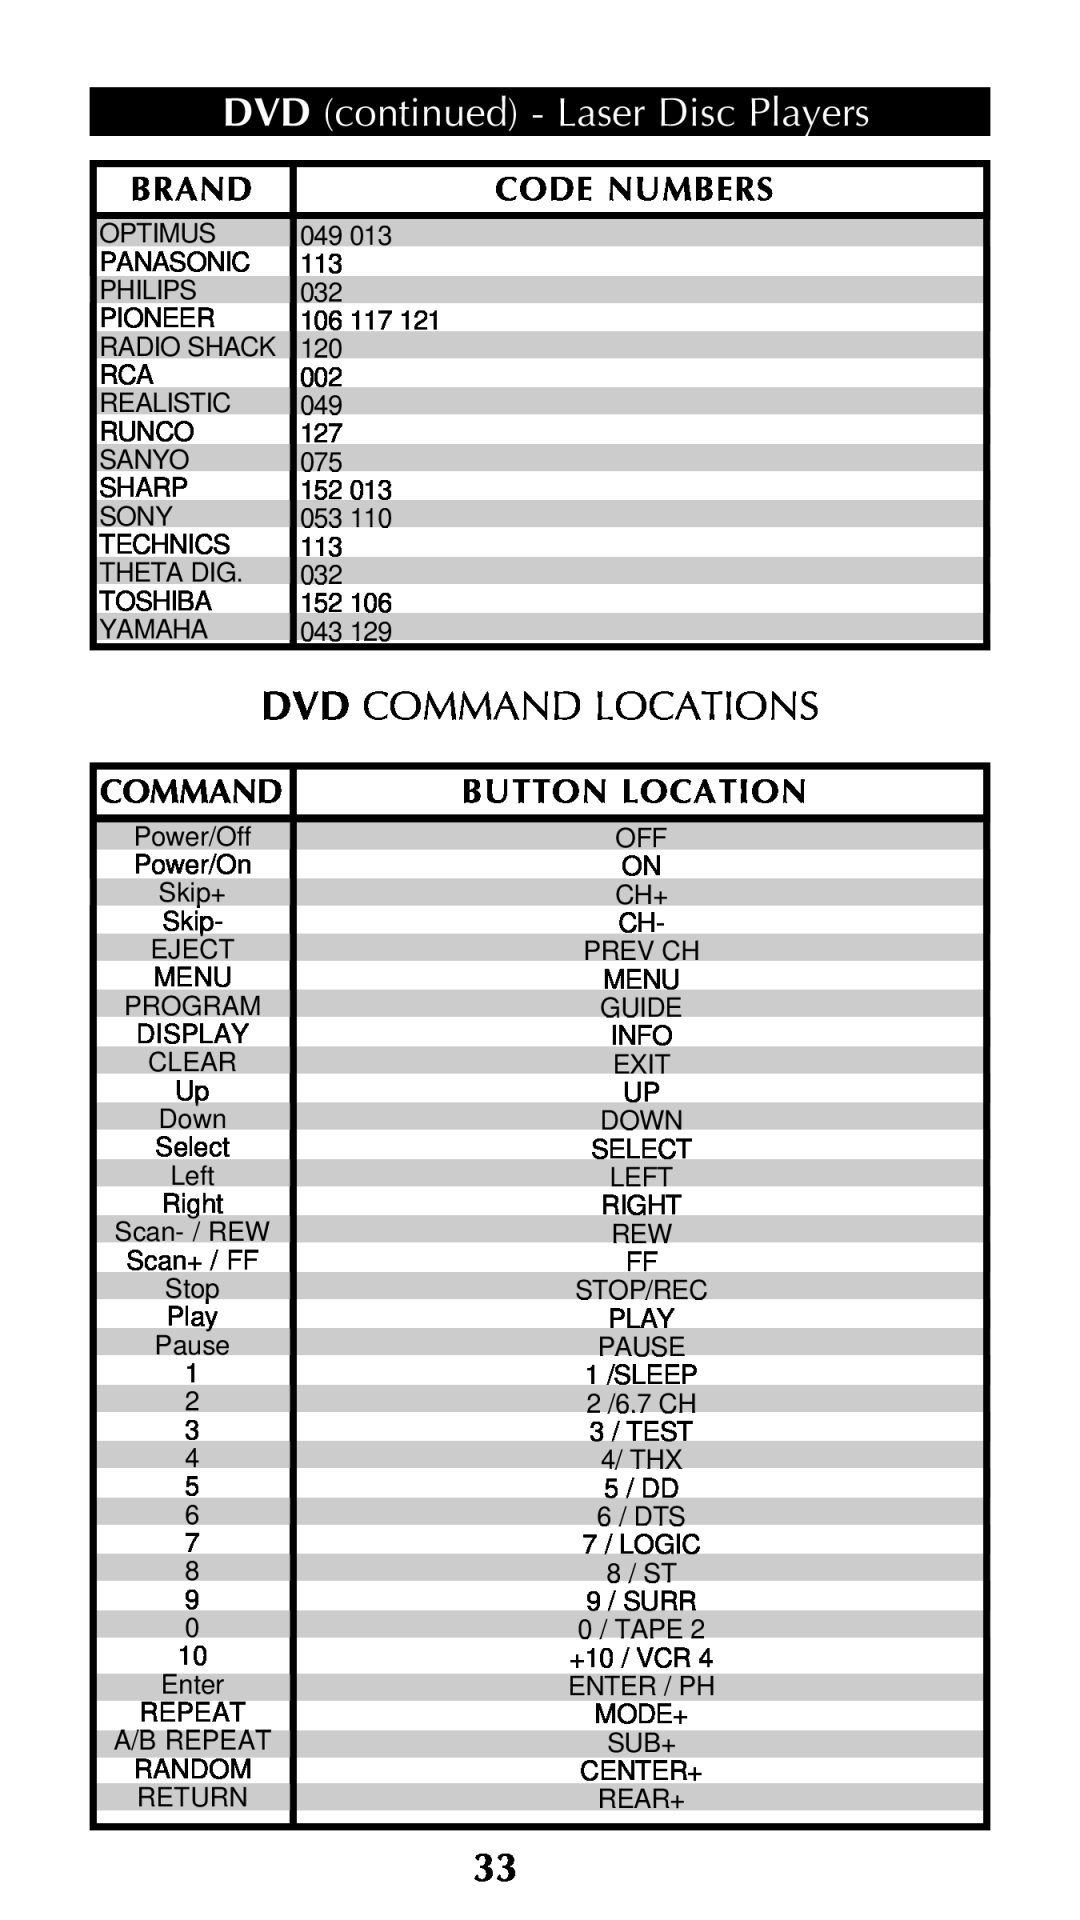 Universal Remote Control Unifier URC-100 owner manual Dvd Command Locations, DVD continued - Laser Disc Players 